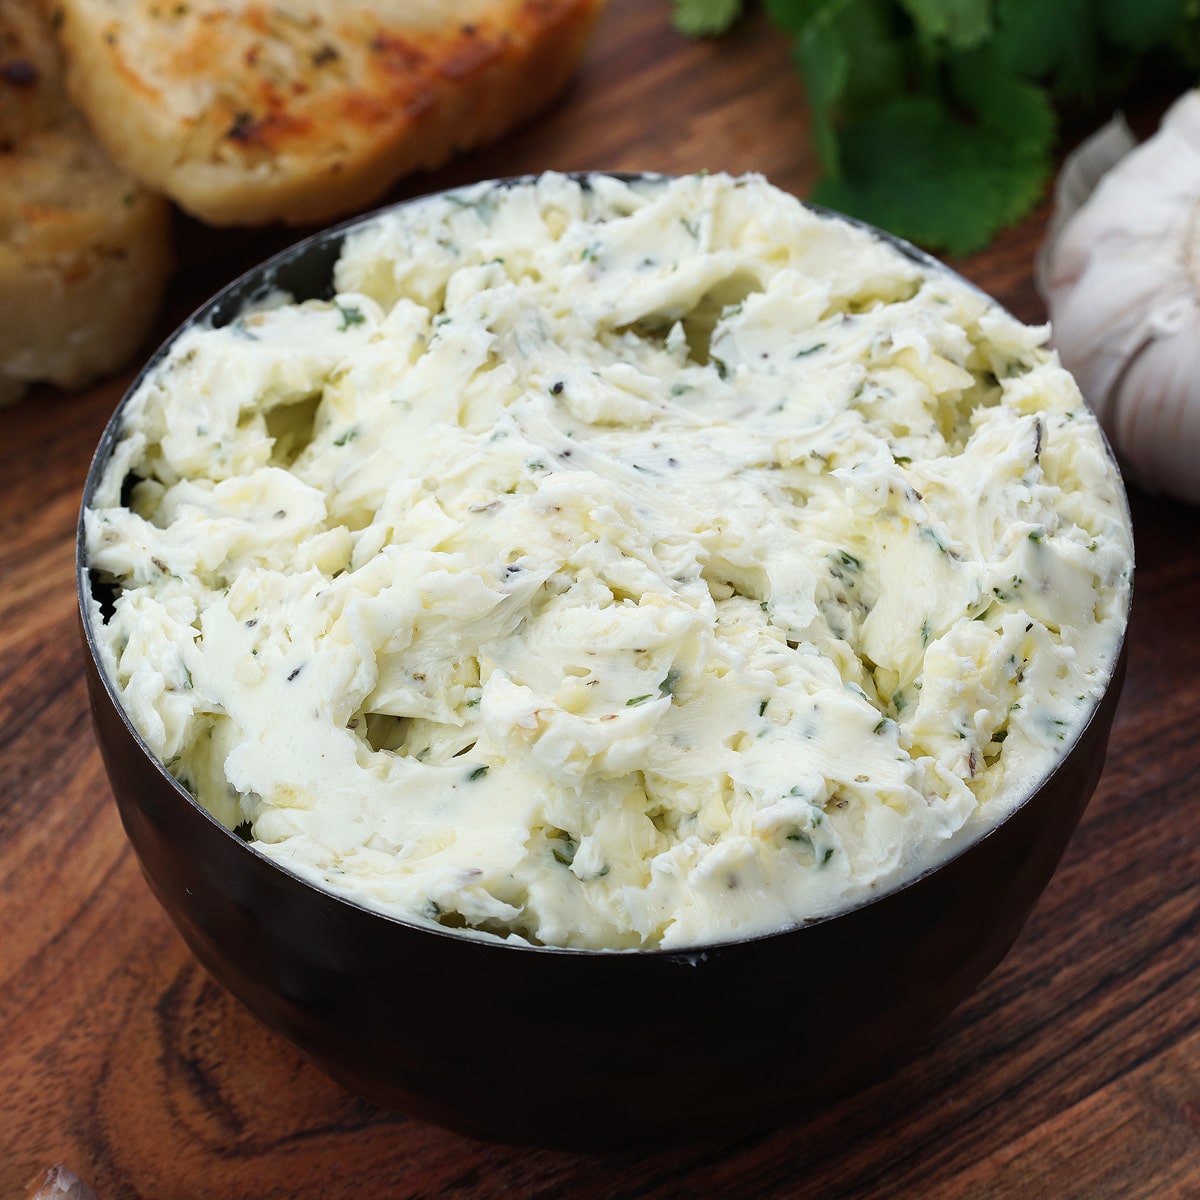 Garlic butter in a cup